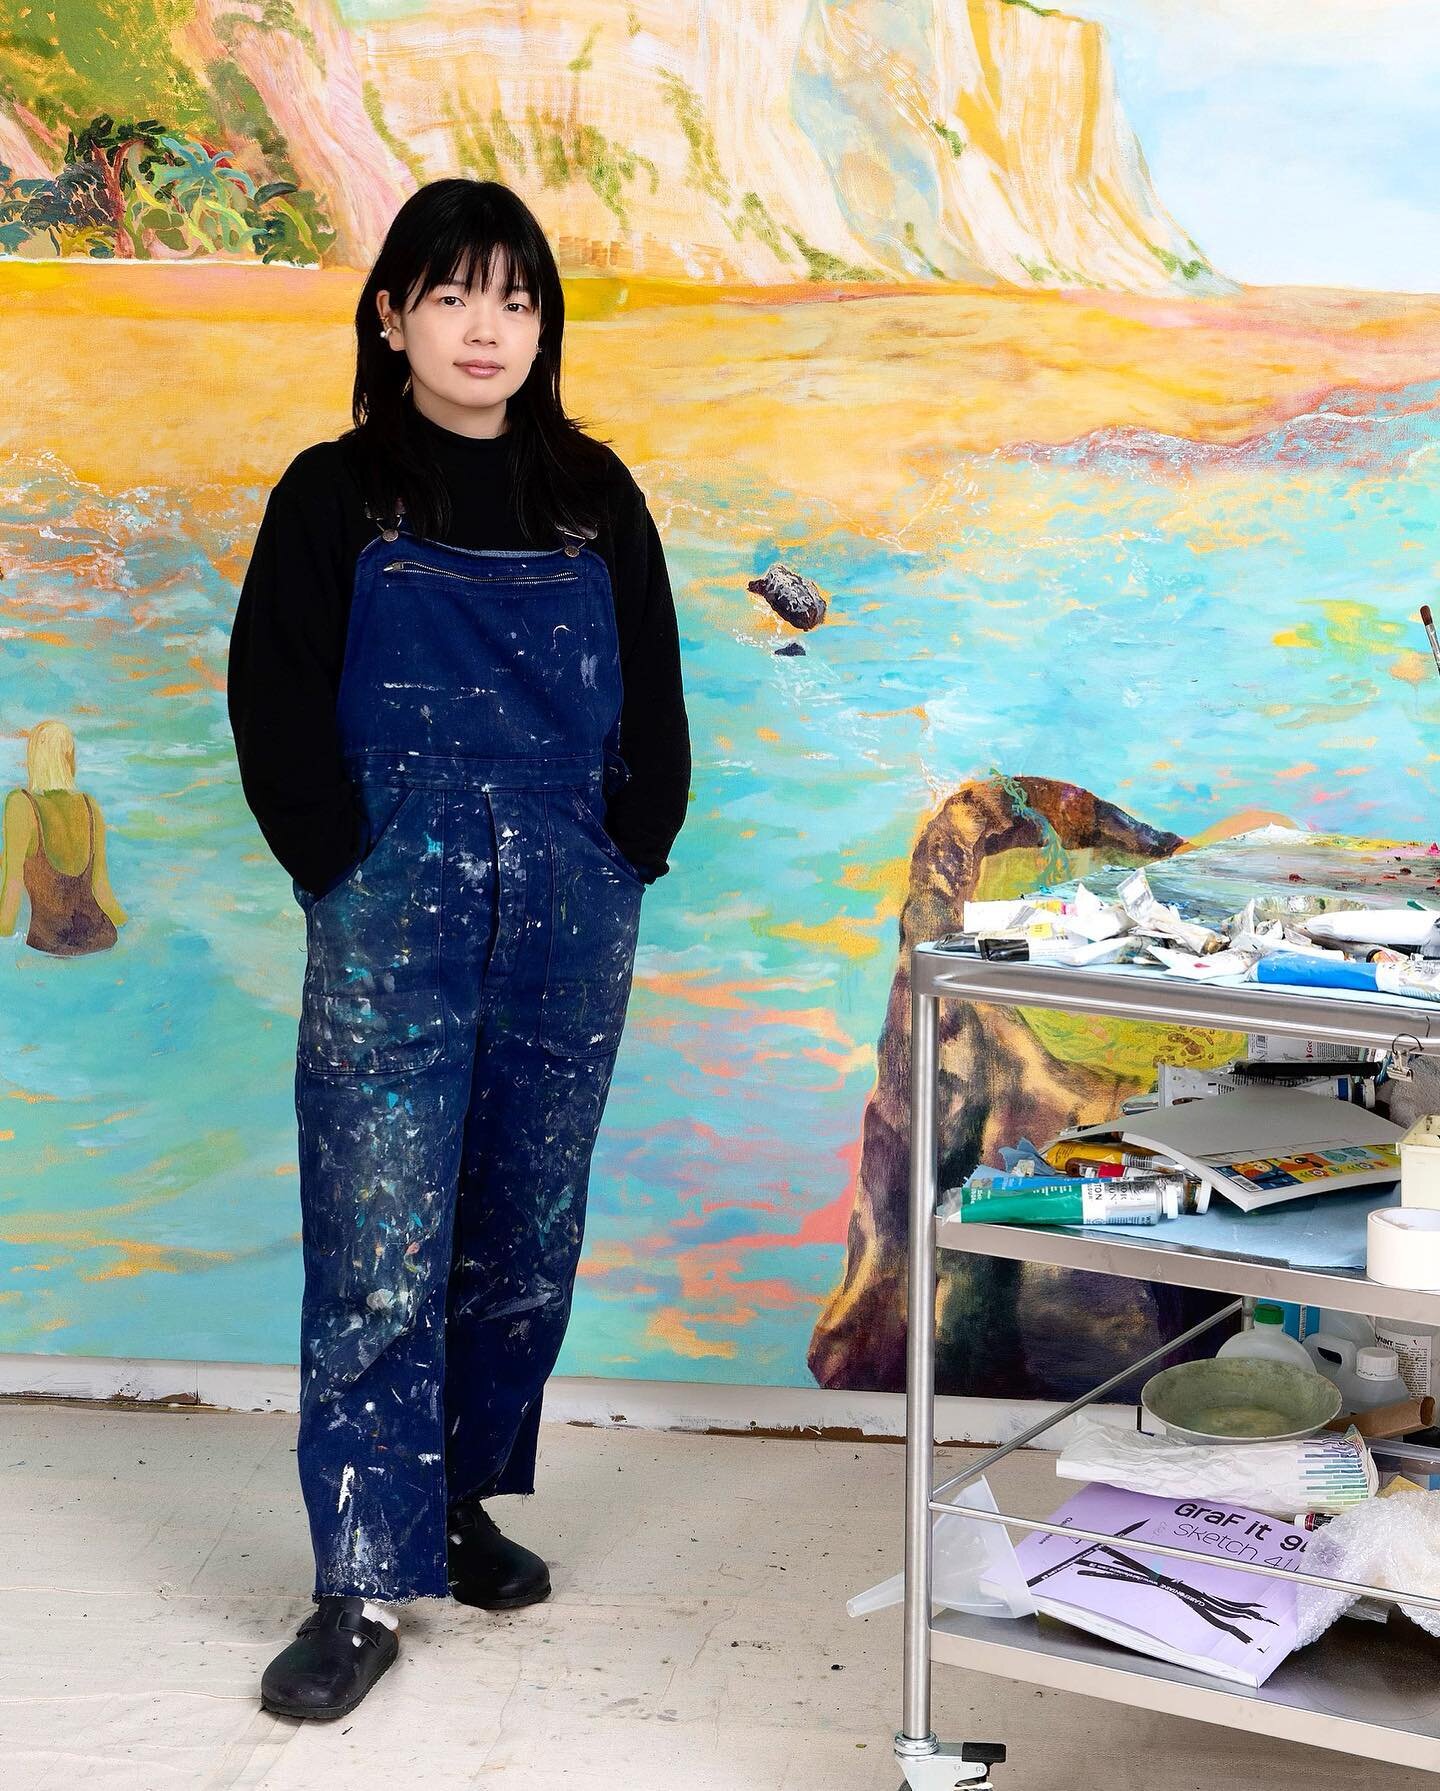 We&rsquo;re very excited to announce this year&rsquo;s residency with London based Japanese artist Minami Kobayashi.
.
.
.
Minami will be included in an exhibition curated by @henryrelph opening at @galeriemarguo in Paris next week and has most recen